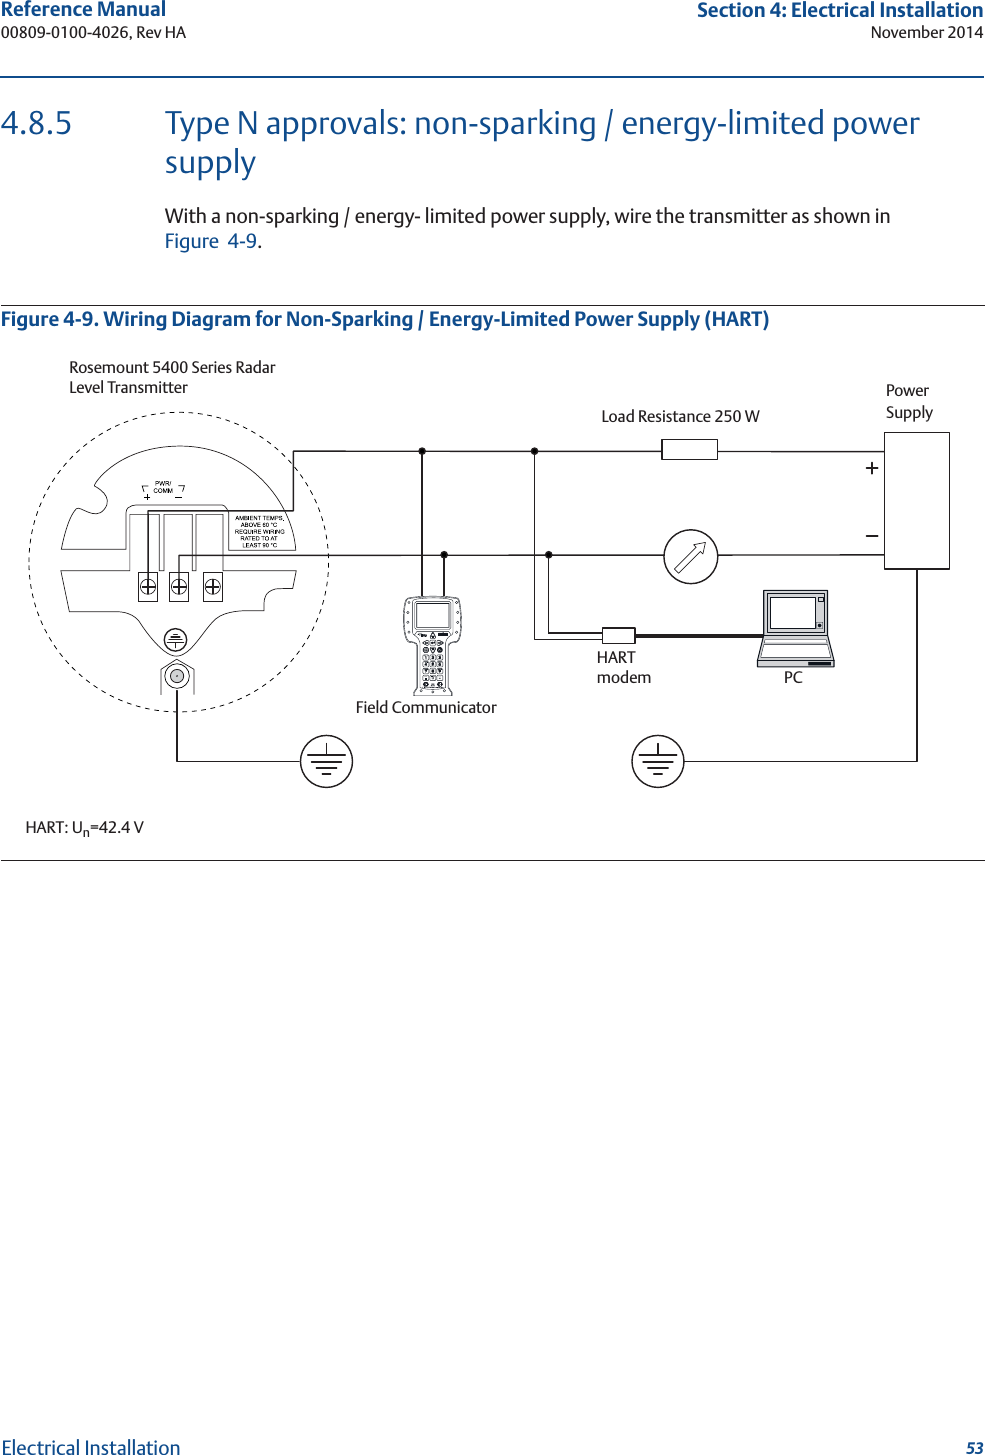 53Reference Manual 00809-0100-4026, Rev HASection 4: Electrical InstallationNovember 2014Electrical Installation4.8.5 Type N approvals: non-sparking / energy-limited power supplyWith a non-sparking / energy- limited power supply, wire the transmitter as shown in Figure 4-9.Figure 4-9. Wiring Diagram for Non-Sparking / Energy-Limited Power Supply (HART) Rosemount 5400 Series Radar Level TransmitterField CommunicatorHARTmodemLoad Resistance 250 WPowerSupplyPCHART: Un=42.4 V